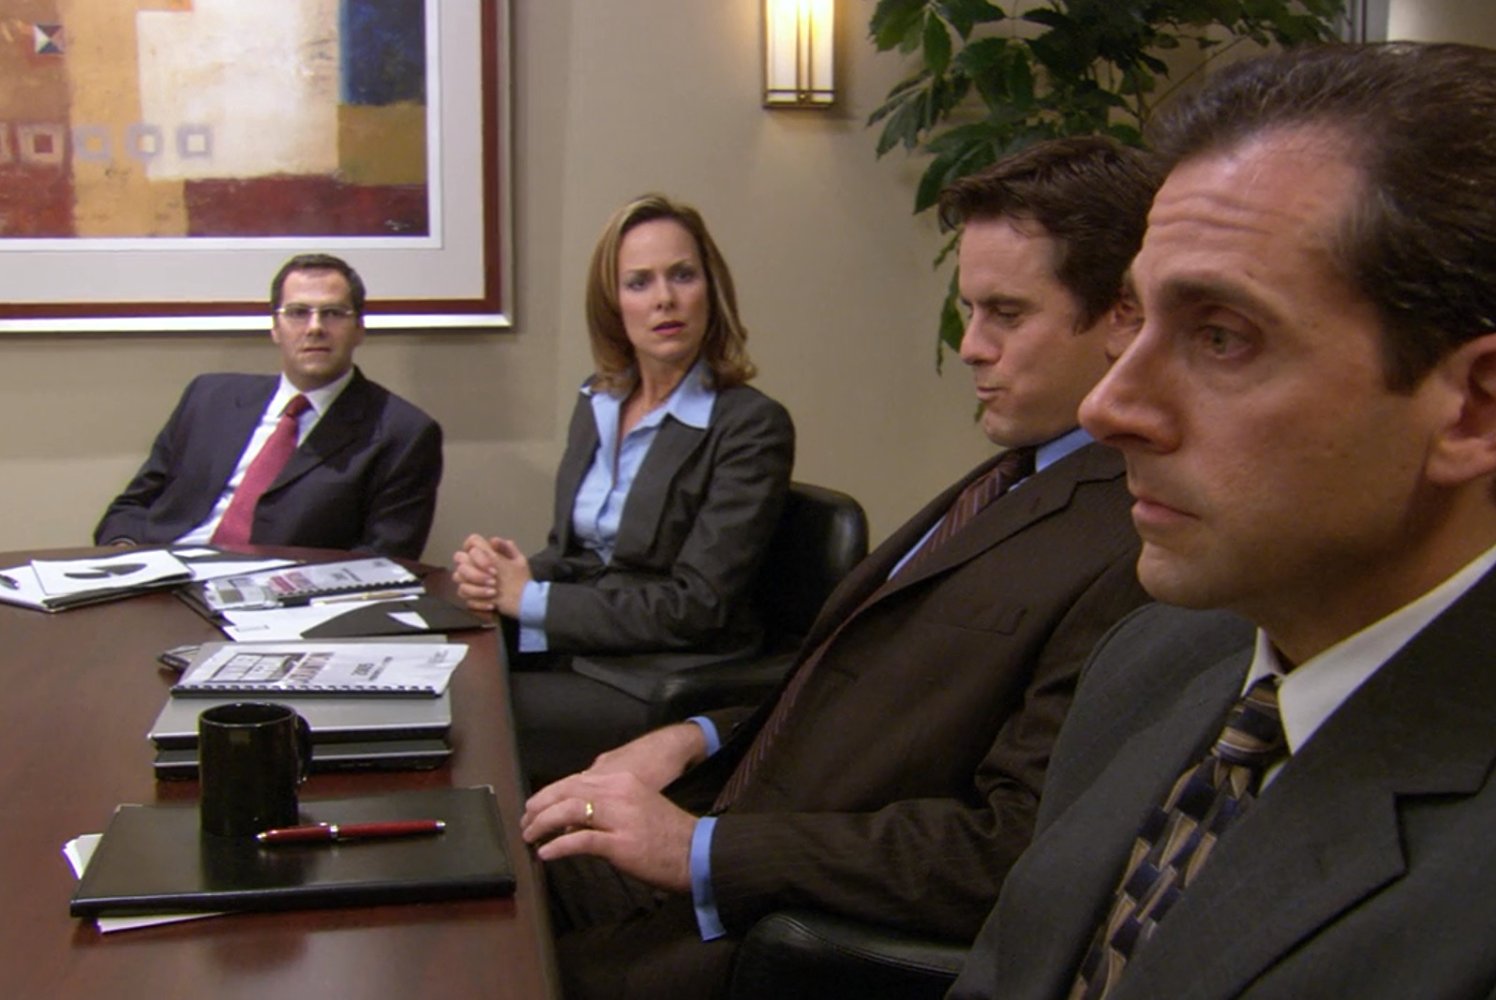 list of the office characters